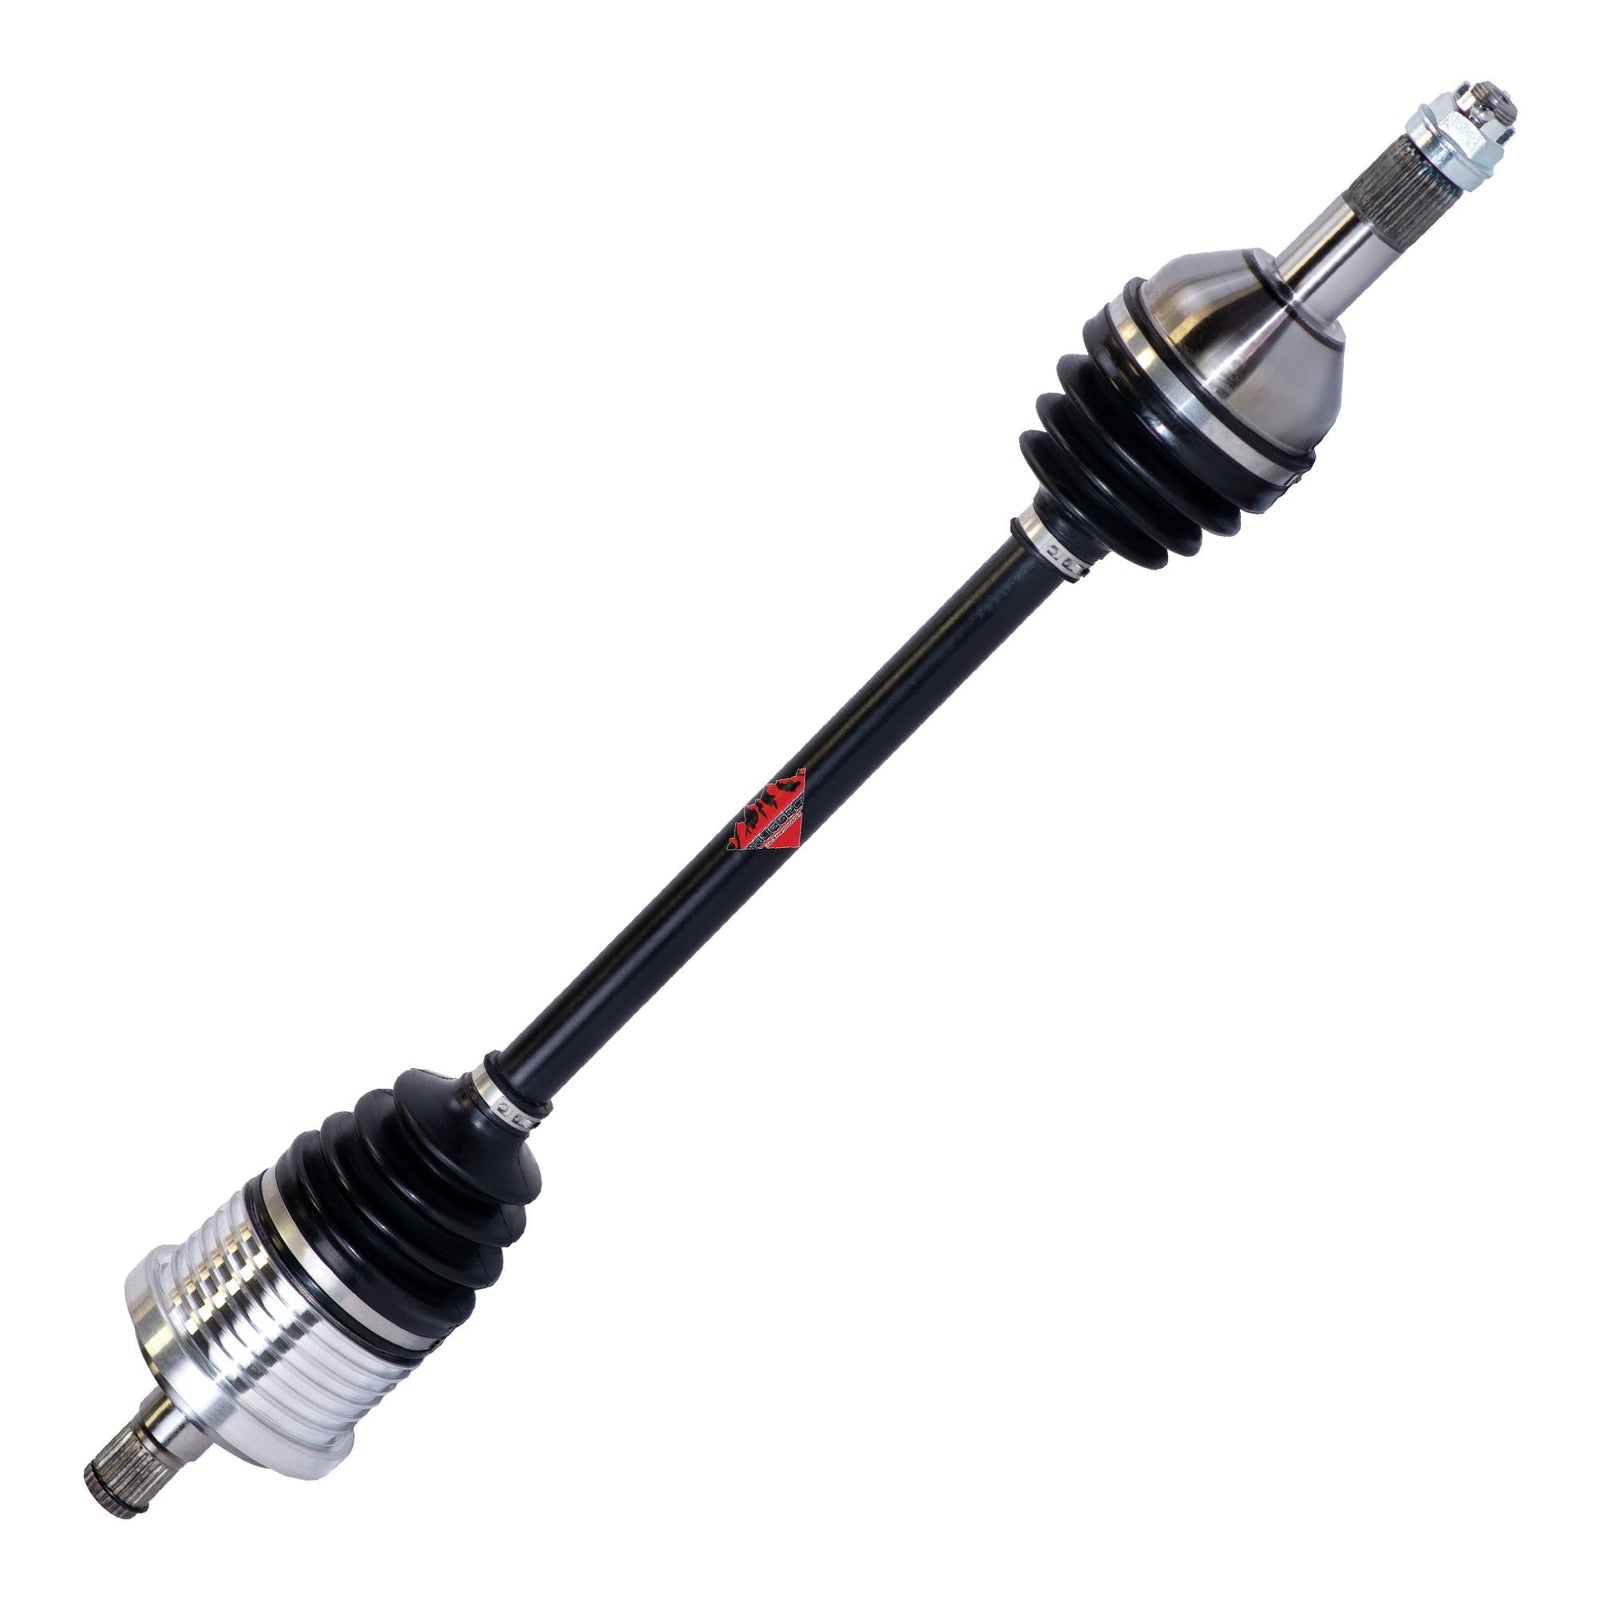 CFMOTO ZFORCE 500 Rugged Performance Axle